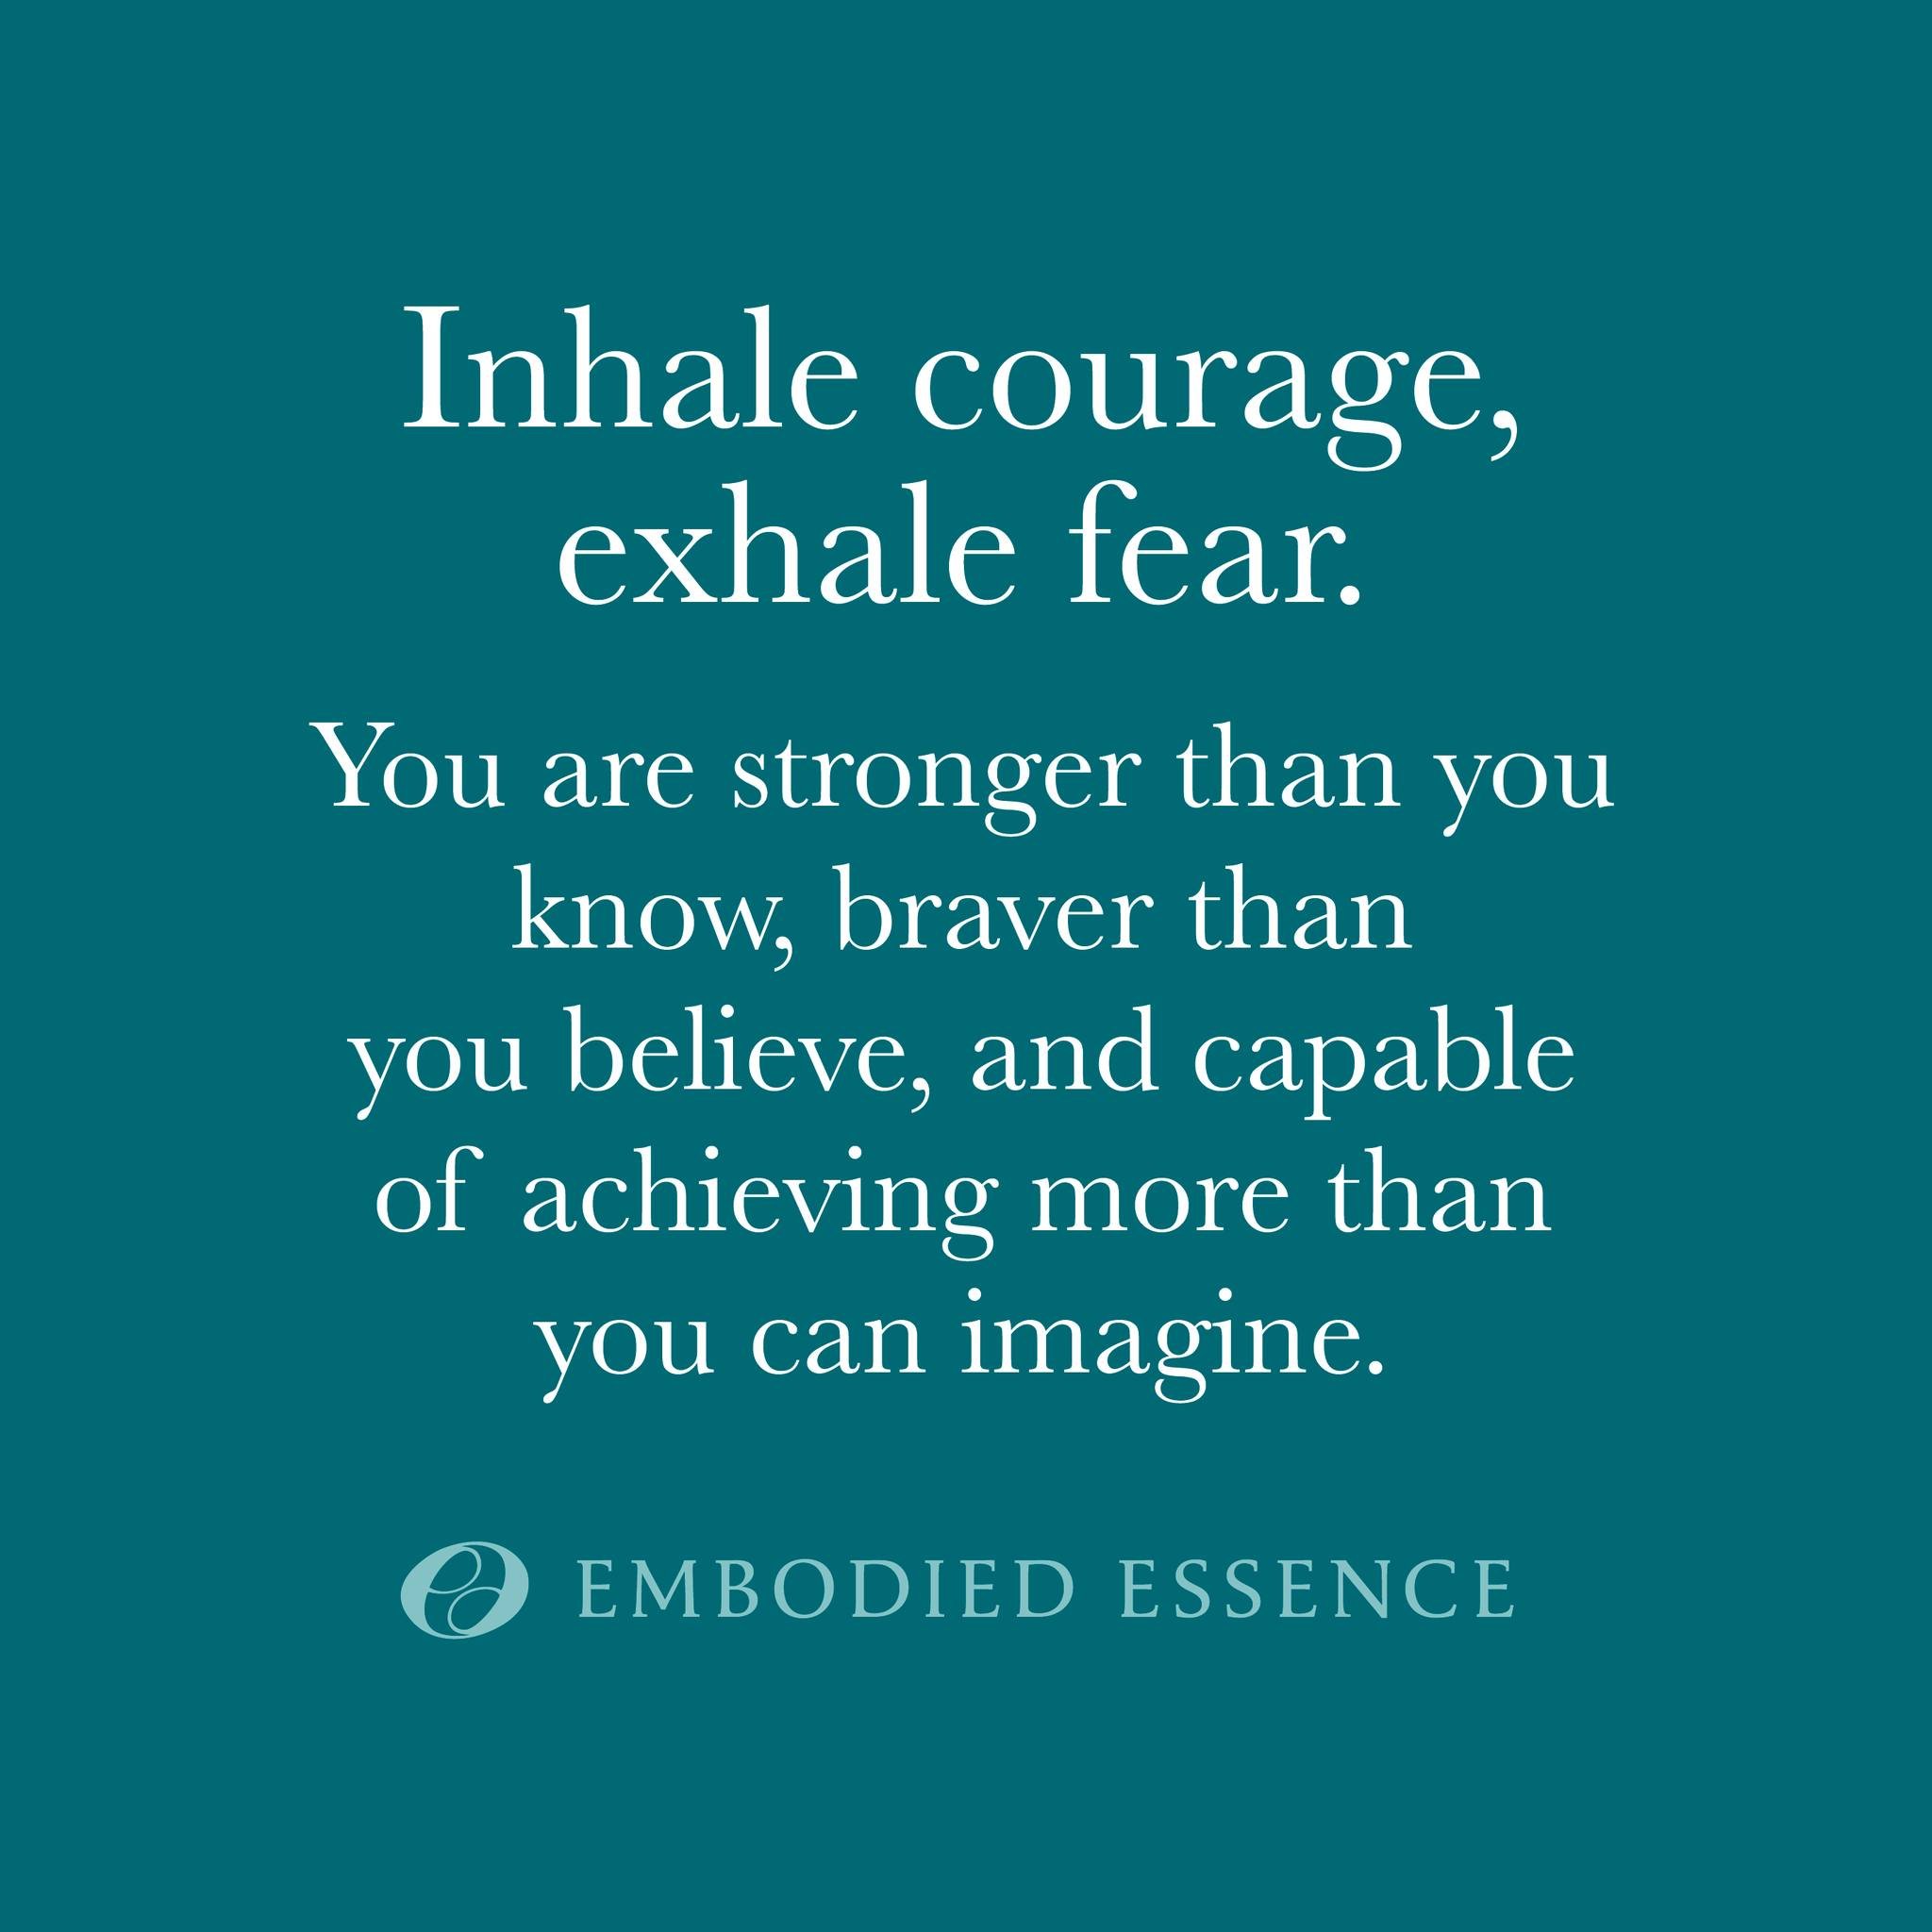 Inhale courage, exhale fear. You are stronger than you know, braver than you believe, and capable of achieving more than you can imagine.

#yougothis #inhaleexhalerepeat #courage